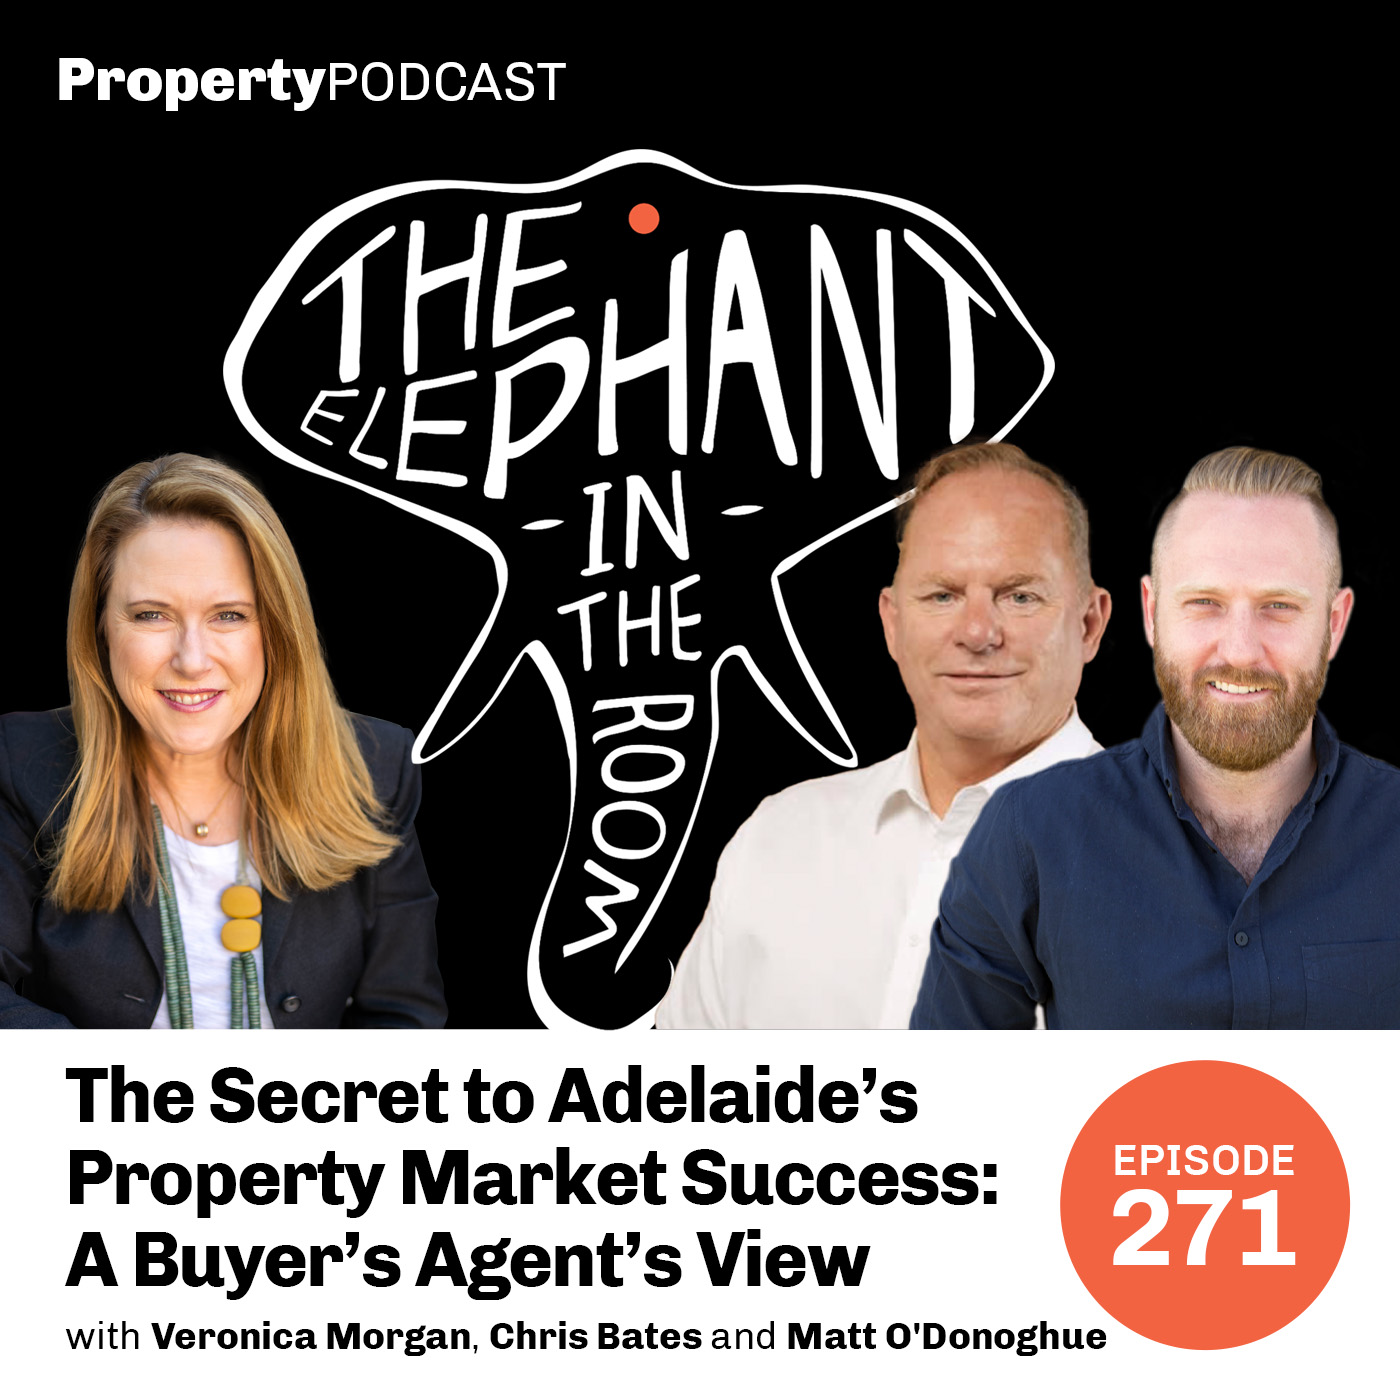 The Secret to Adelaide’s Property Market Success: A Buyer’s Agent’s View